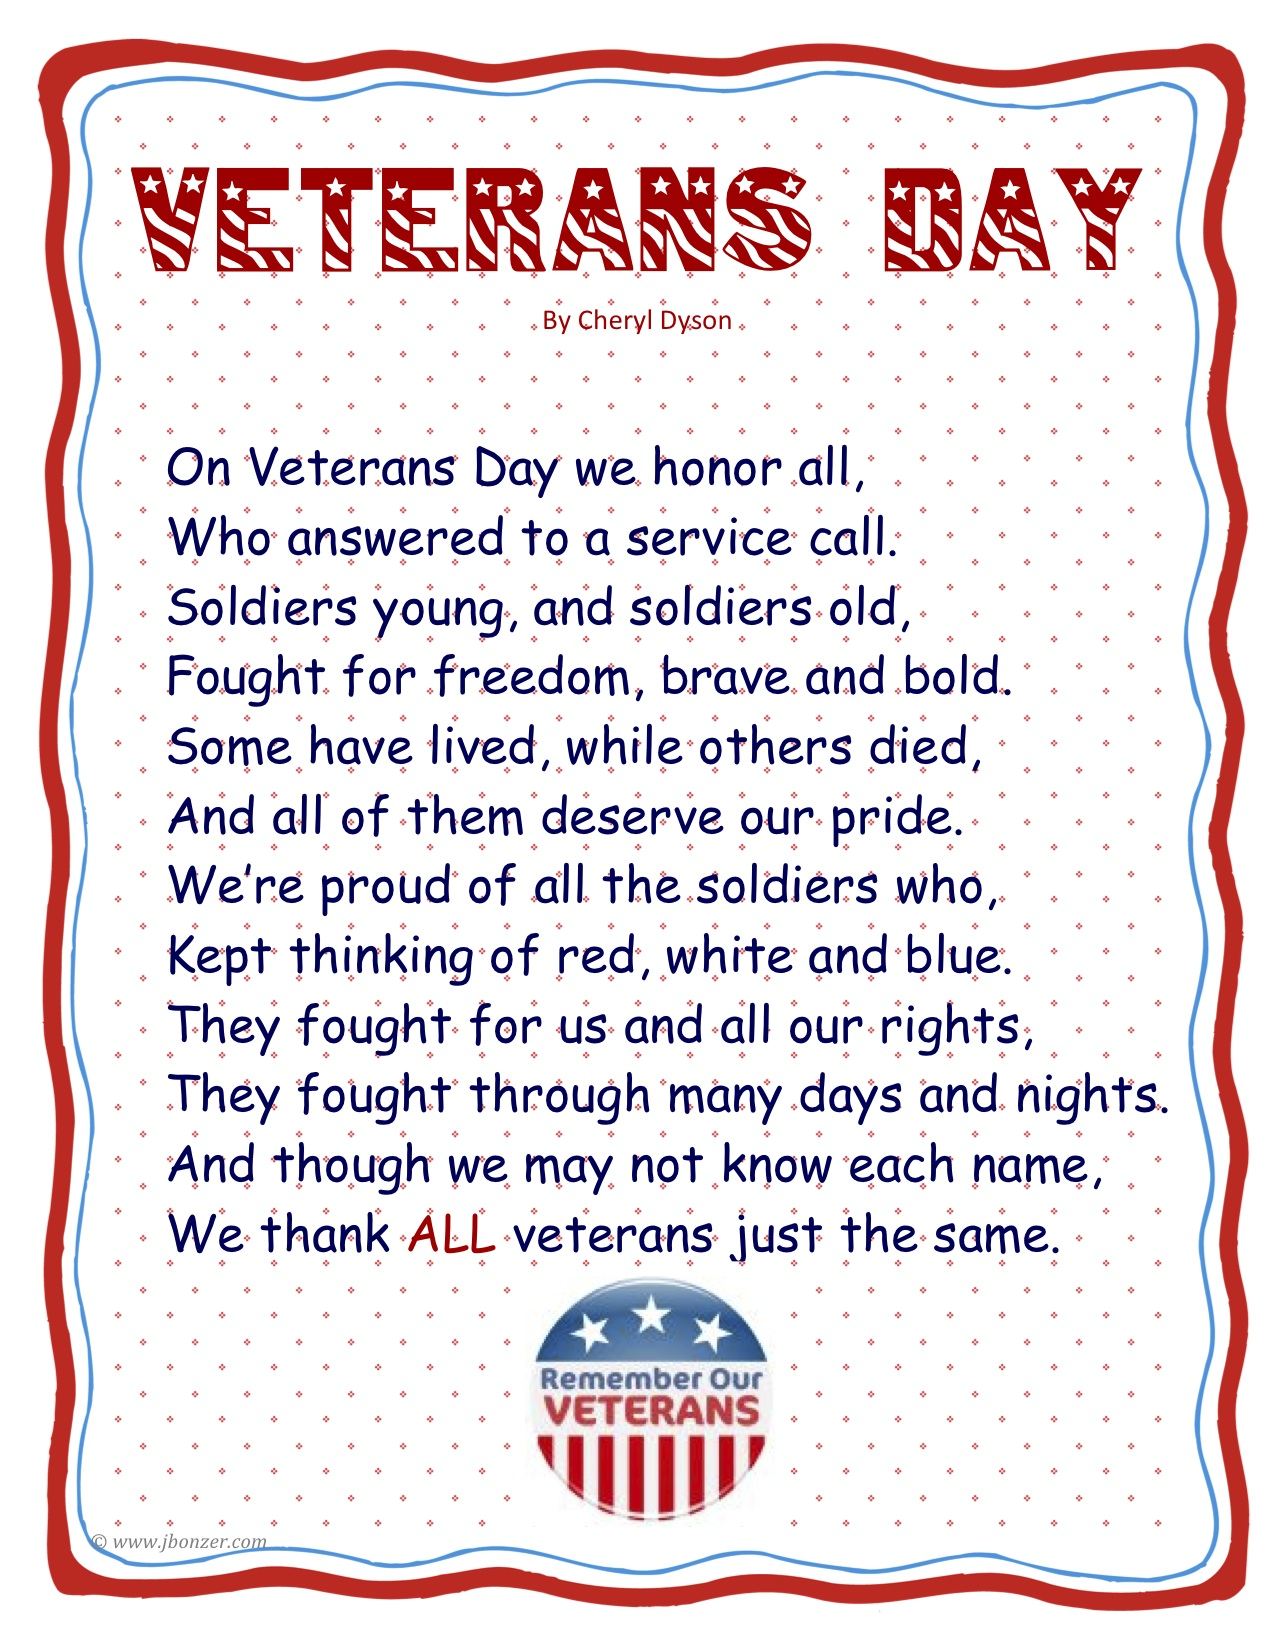 Veterans day meaning